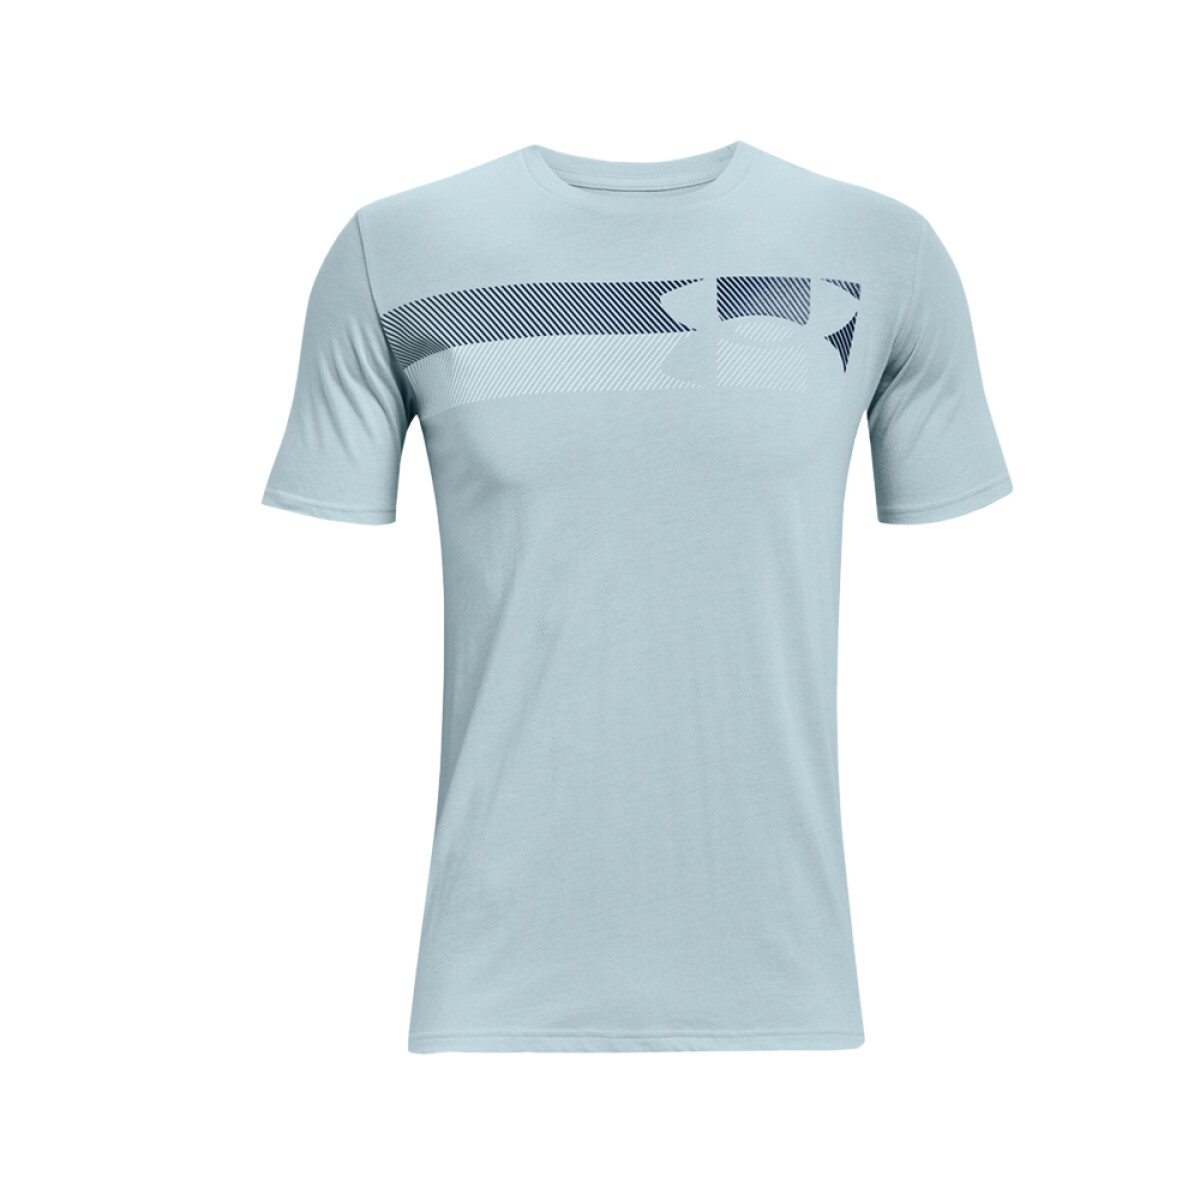 REMERA UNDER ARMOUR FAST LEFT CHEST 3 - Light blue 